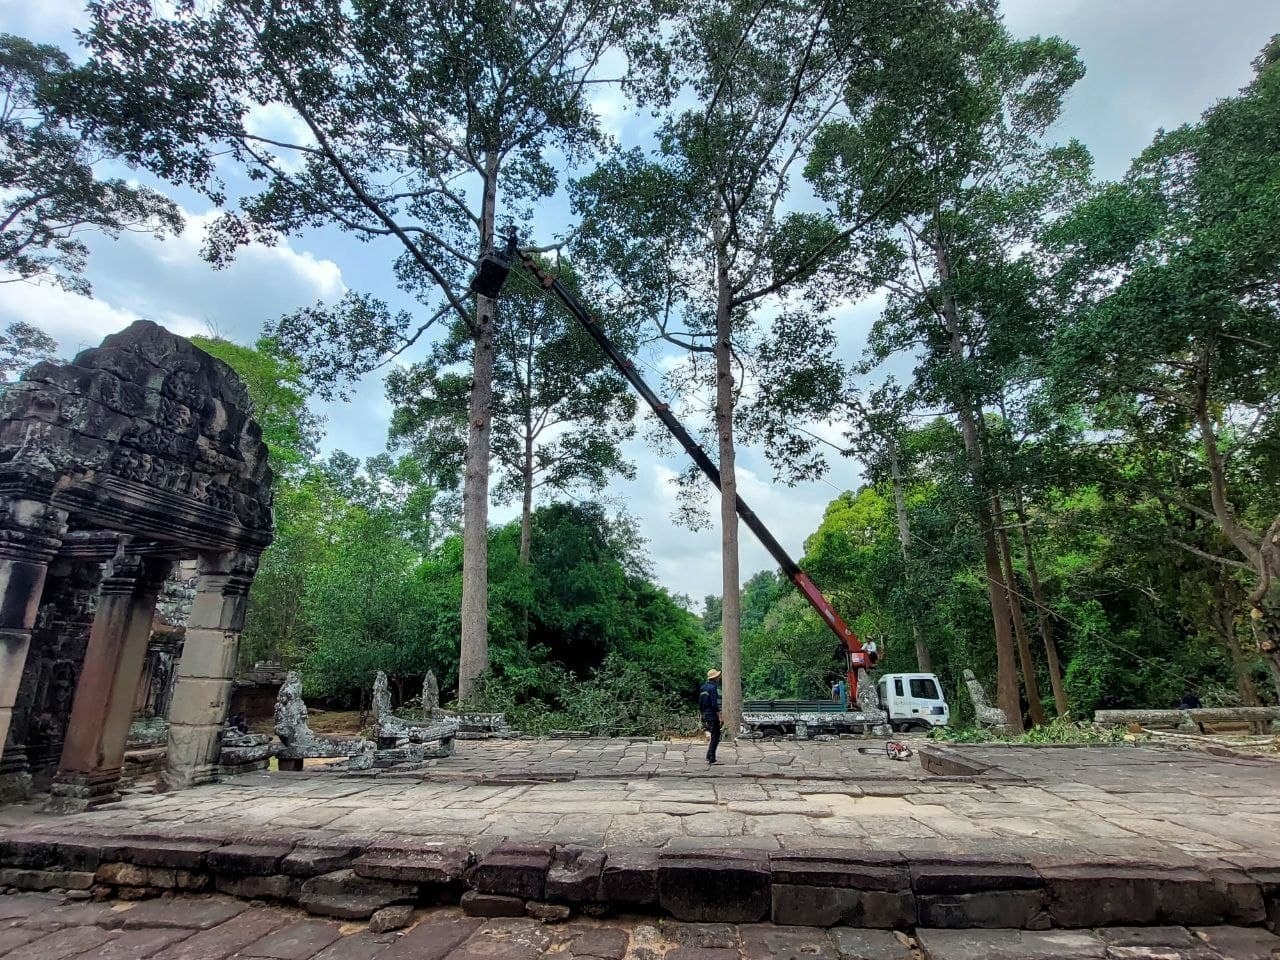 APSARA National Authority removes high-risked trees at Banteay Kdei temple